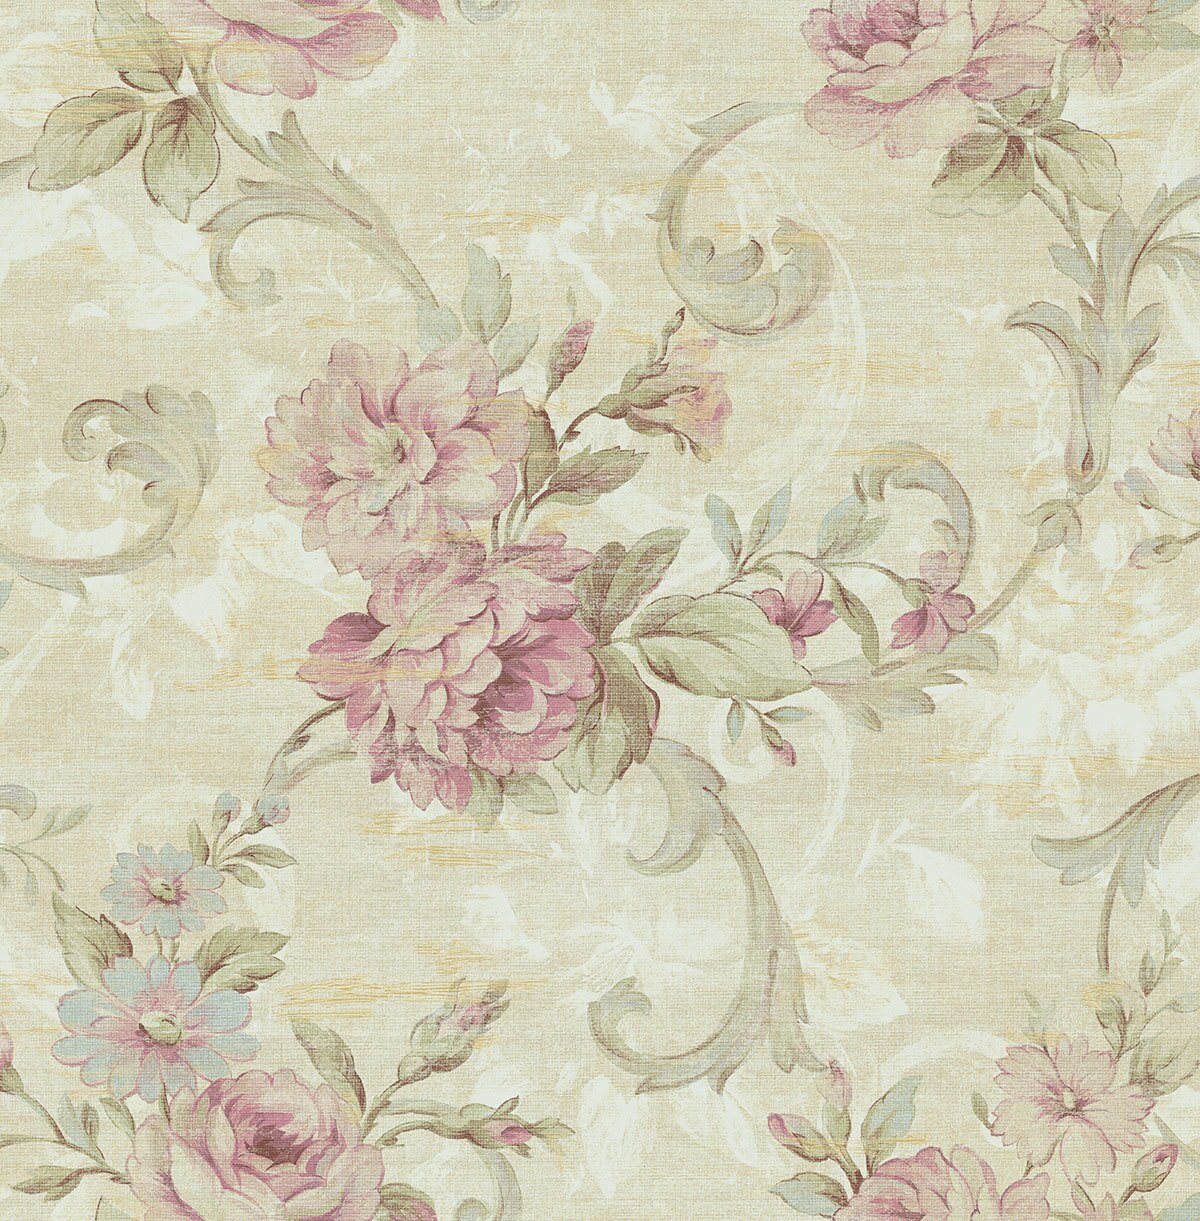 Scrolling Floral Wallpaper In Rosy Ar31201 From Wallquest The